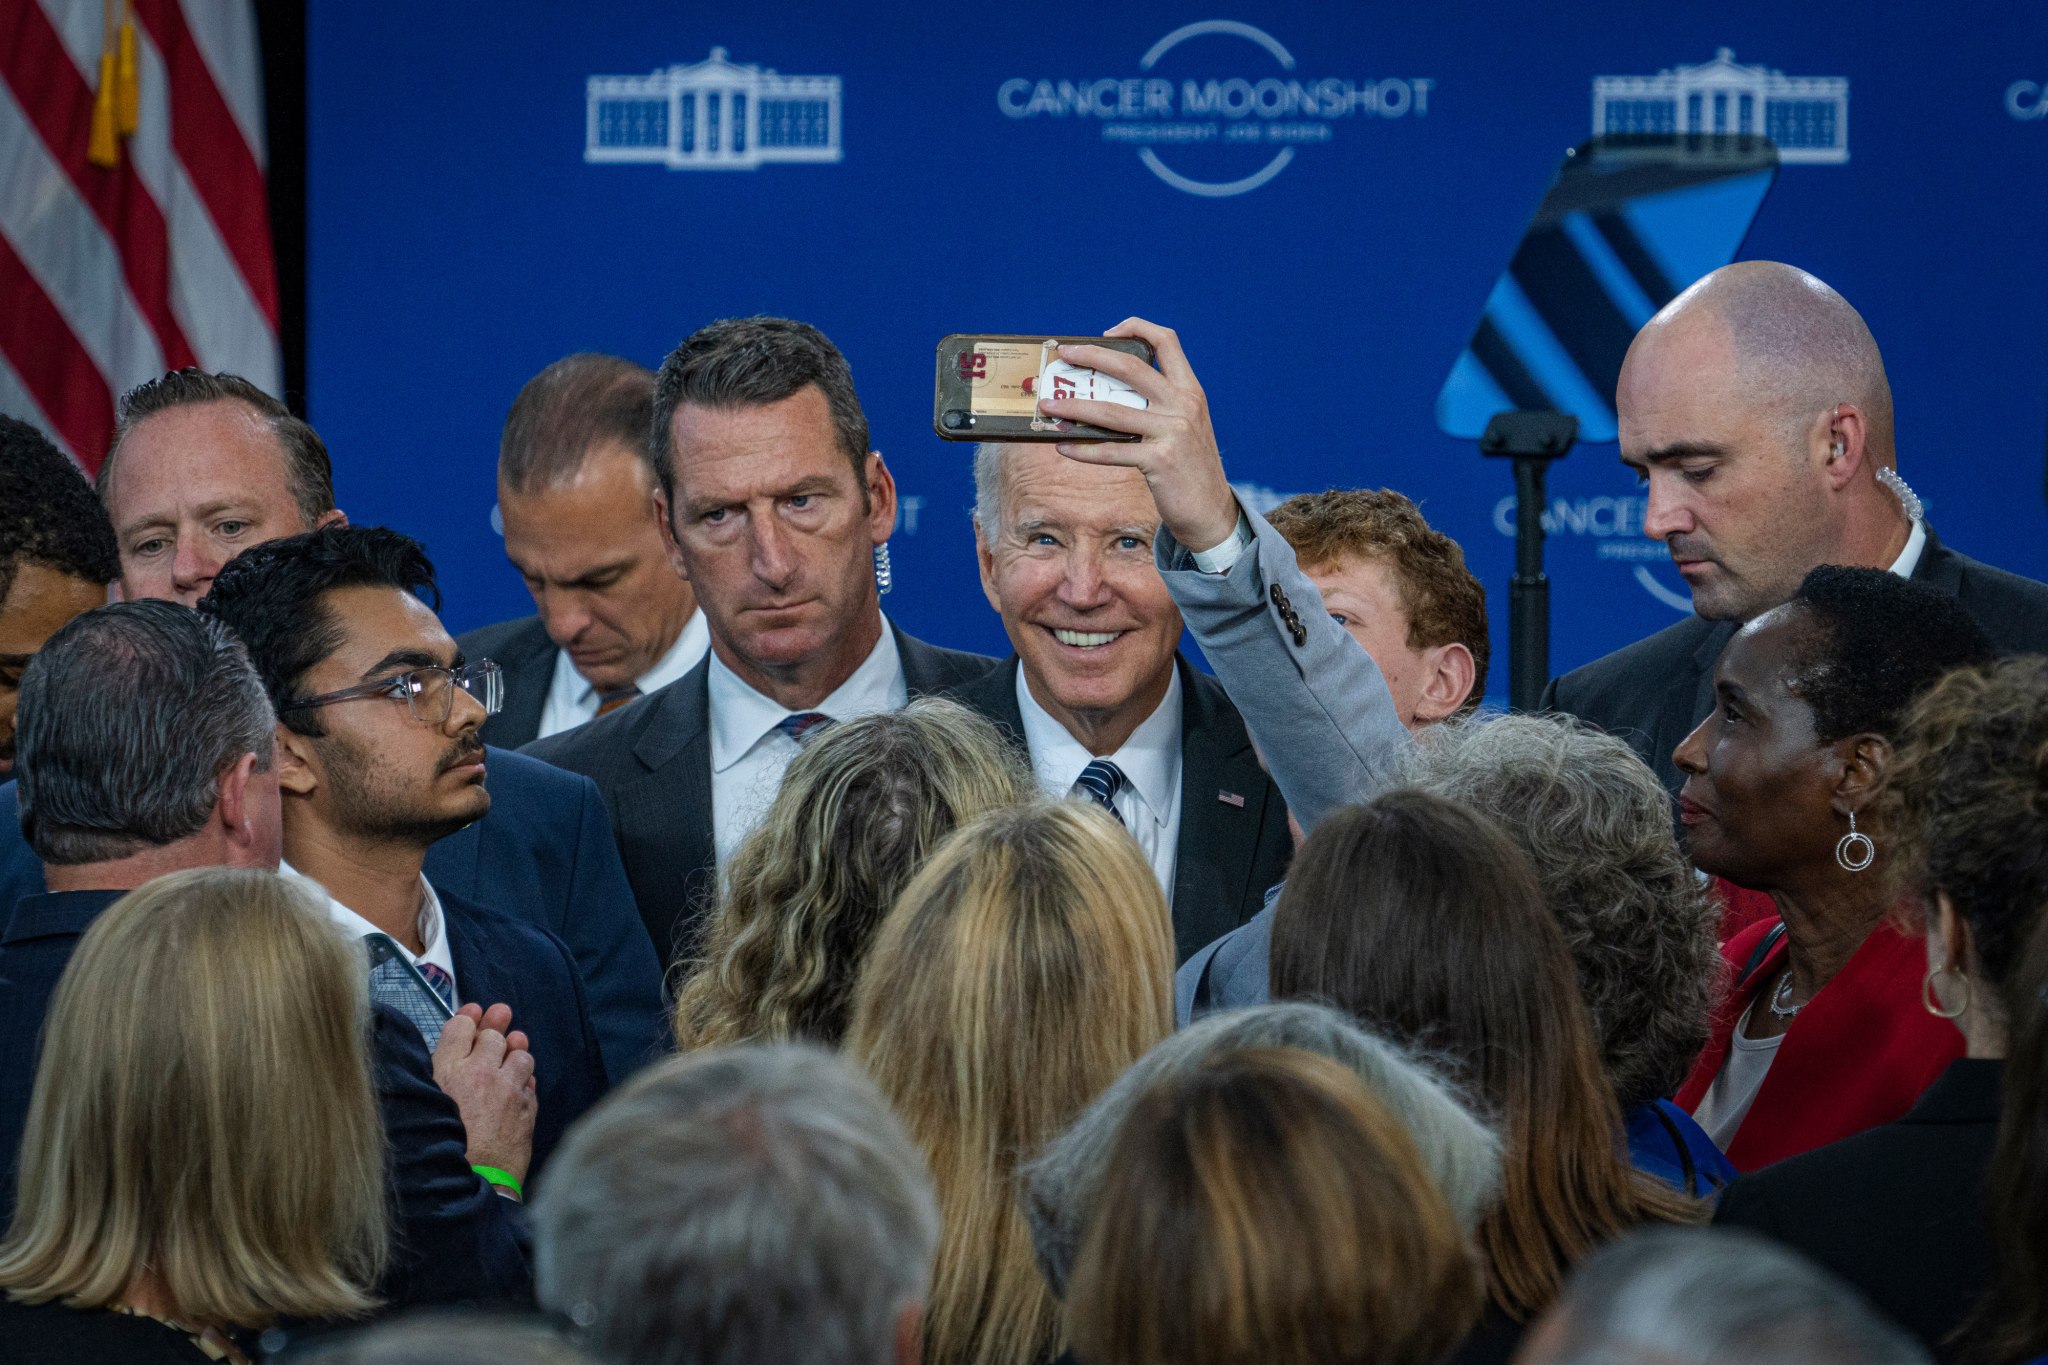 Public health advocates urge action on menthol, applaud accomplishments like patient navigation as Biden administration celebrates 2-year anniversary of ‘cancer moonshot’